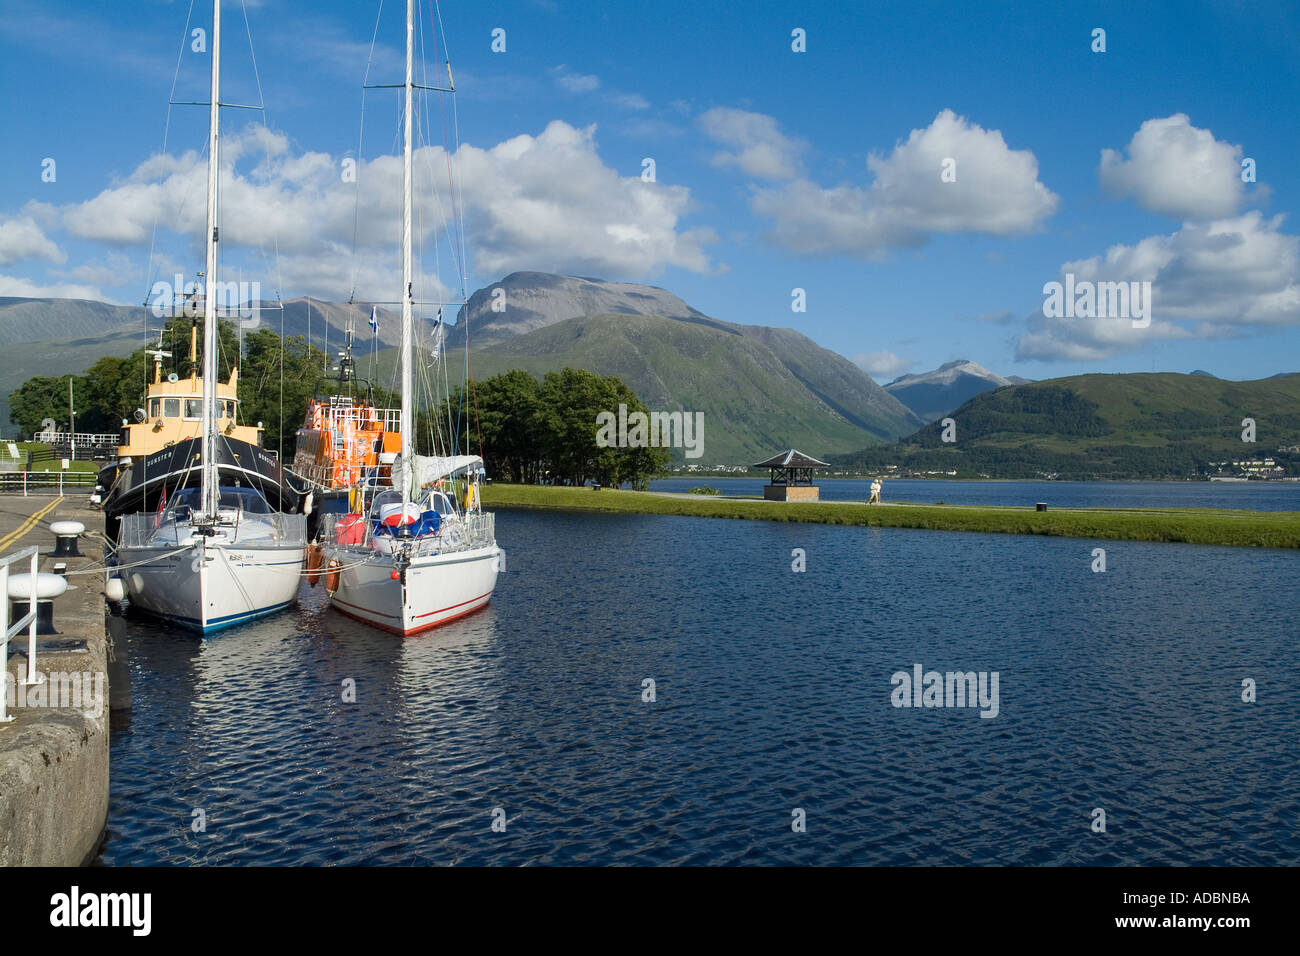 dh Corpach CALEDONIAN CANAL INVERNESSSHIRE Yachts and boats berthed at quayside Ben Nevis mountain scottish holiday leisure tourism yachting boat Stock Photo